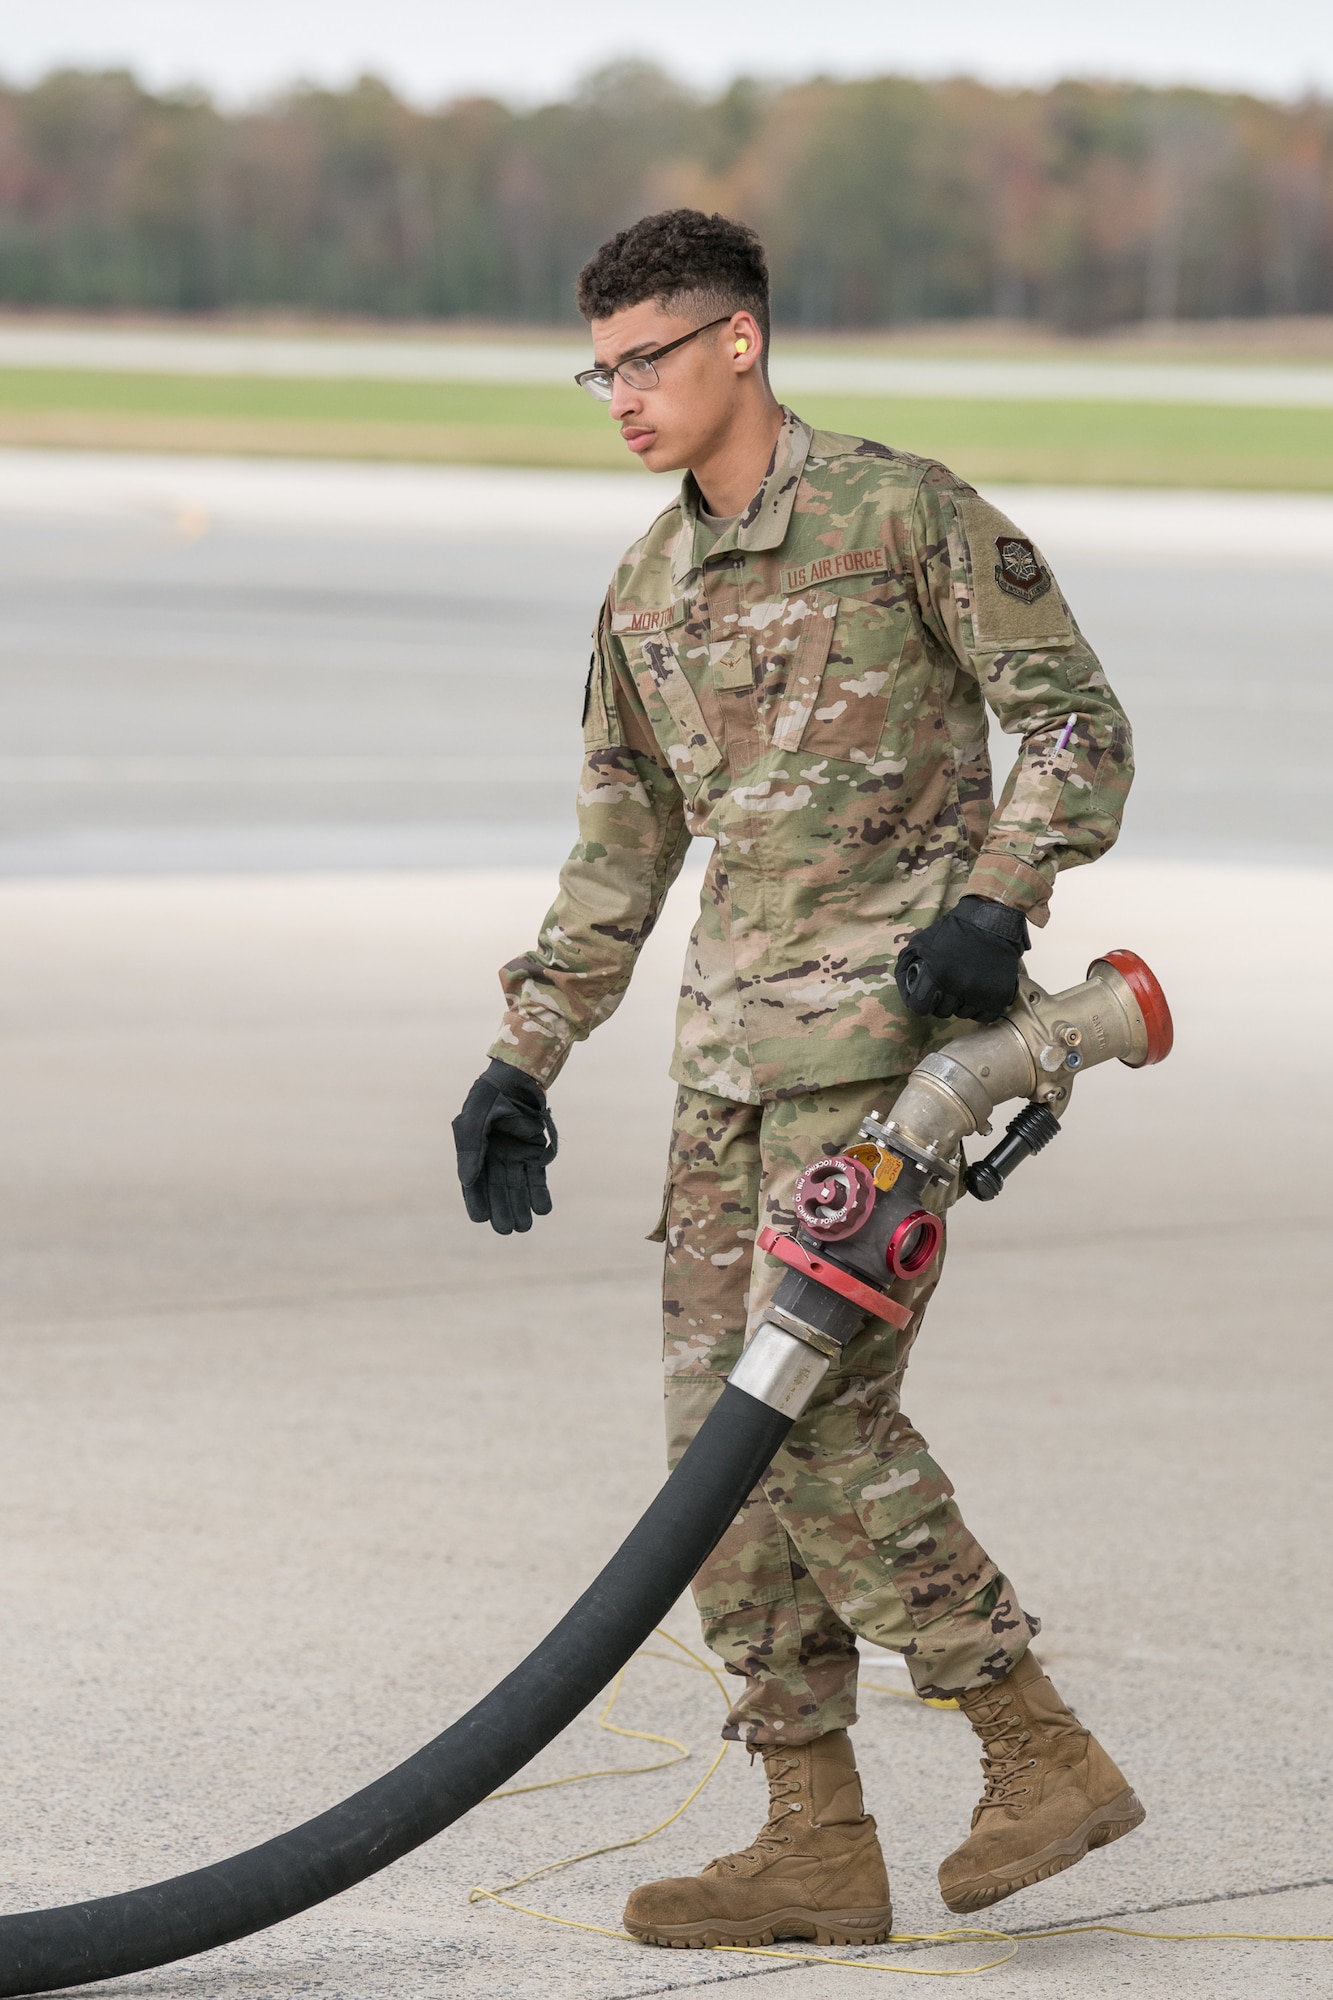 Airman Michael Morton, 436th Logistics Readiness Squadron fuels distribution operator, disconnects a fuel hose from a C-5 Galaxy after refueling is complete, Oct. 29, 2019, at Dover Air Force Base, Del. Refueling can last anywhere from a few minutes to a few hours. (U.S. Air Force photo by Mauricio Campino)